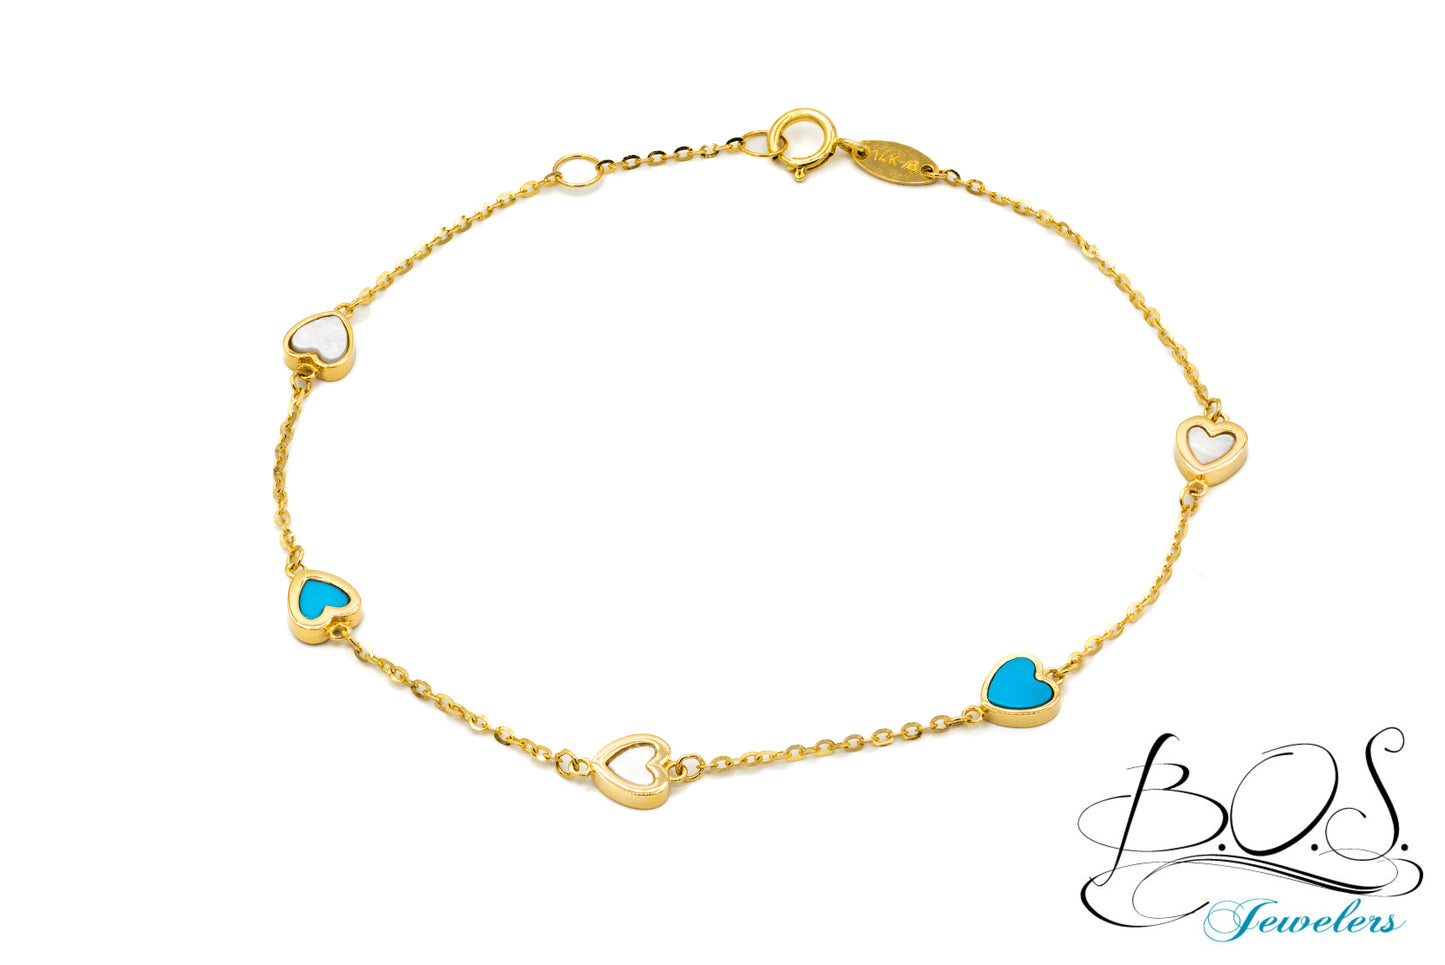 14K Gold Heart Mother of Pearl and Turquoise Bracelet